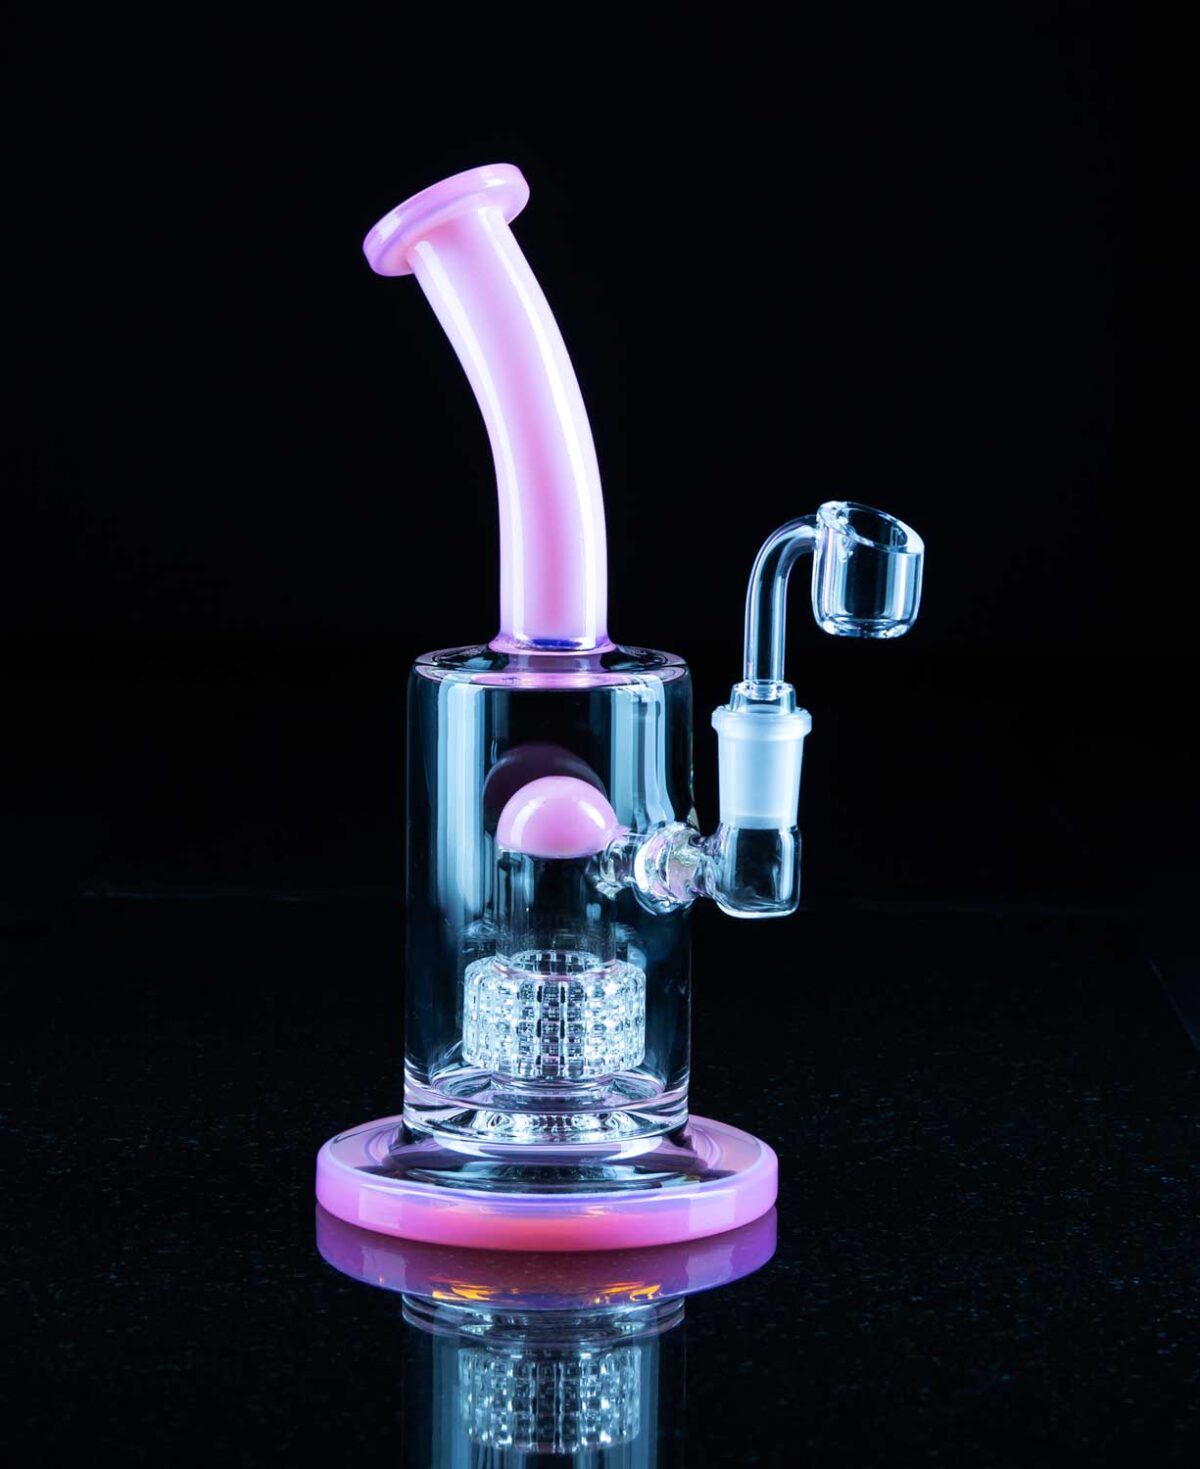 pink rig with percolator